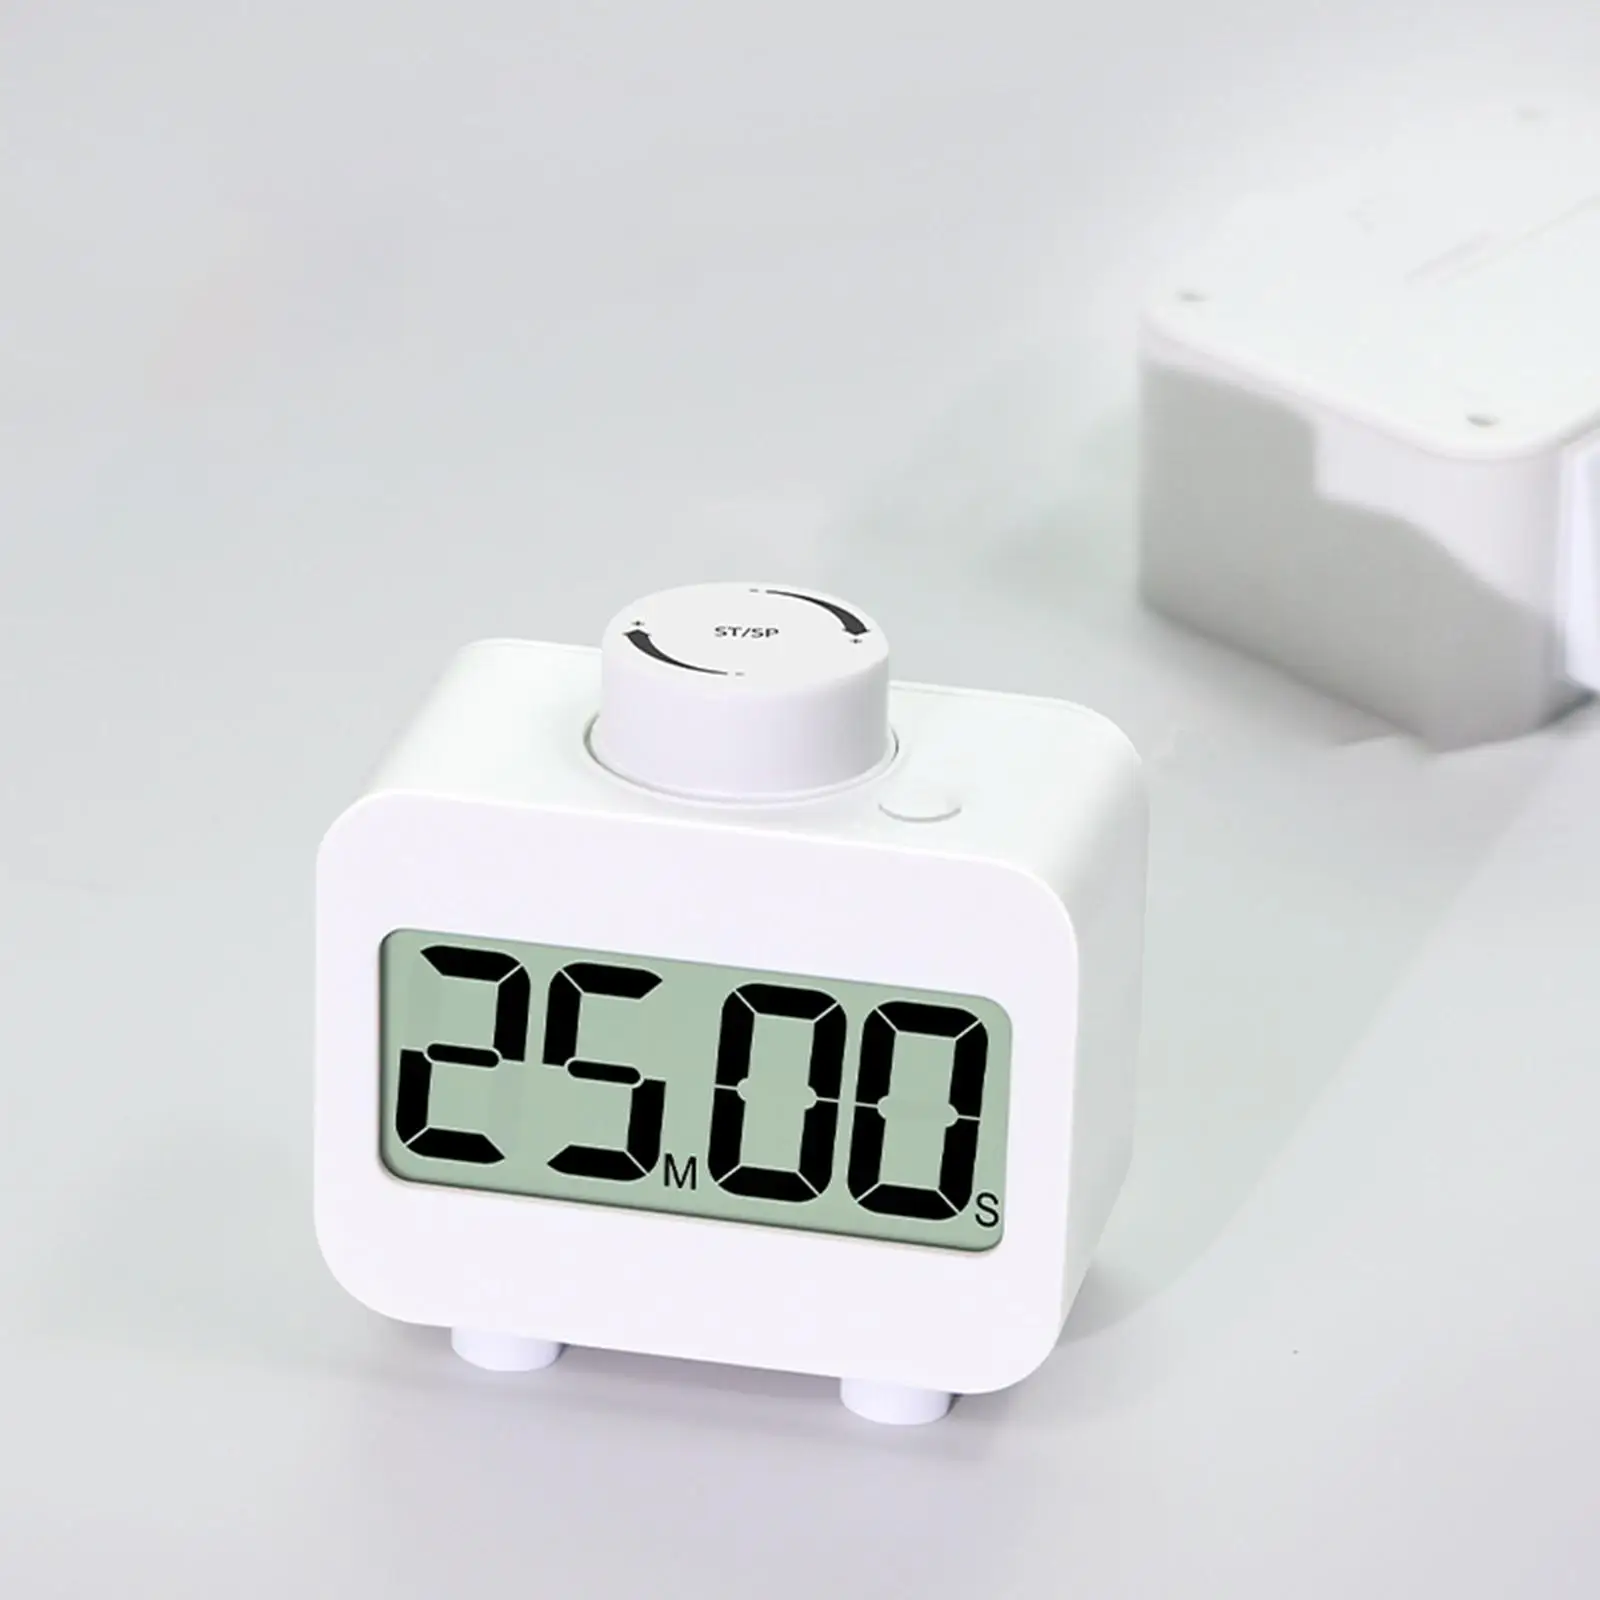 Digital Timer with Bracket Display Screen Durable for Kitchen Exercise Yoga